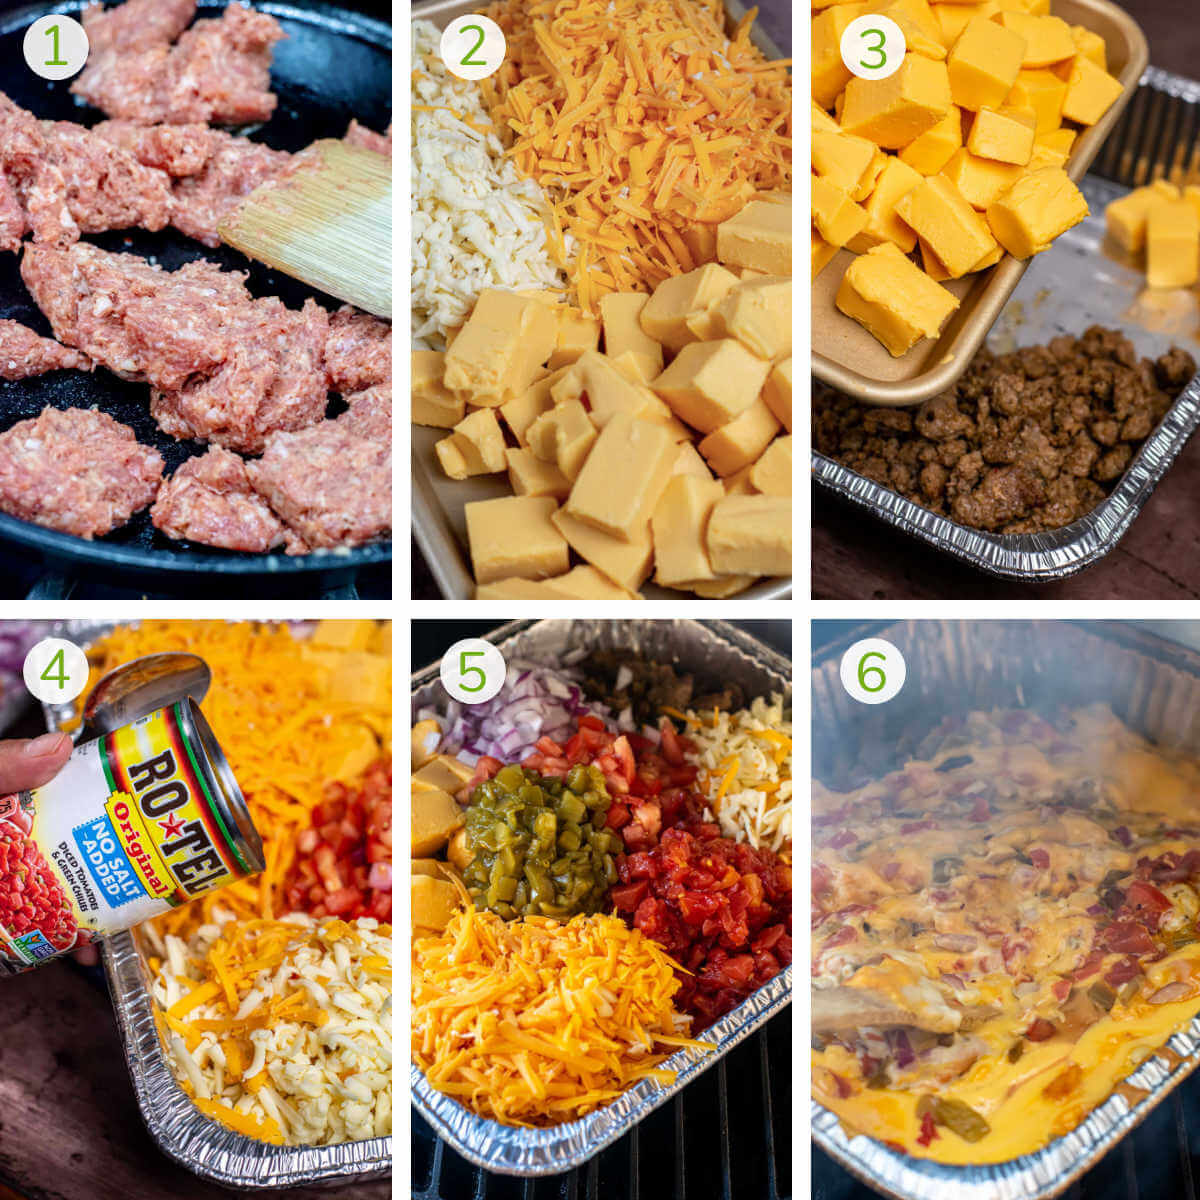 six photos showing the steps to make smoked queso dip including adding all ingredients to a disposable aluminum pan, smoking it and mixing.